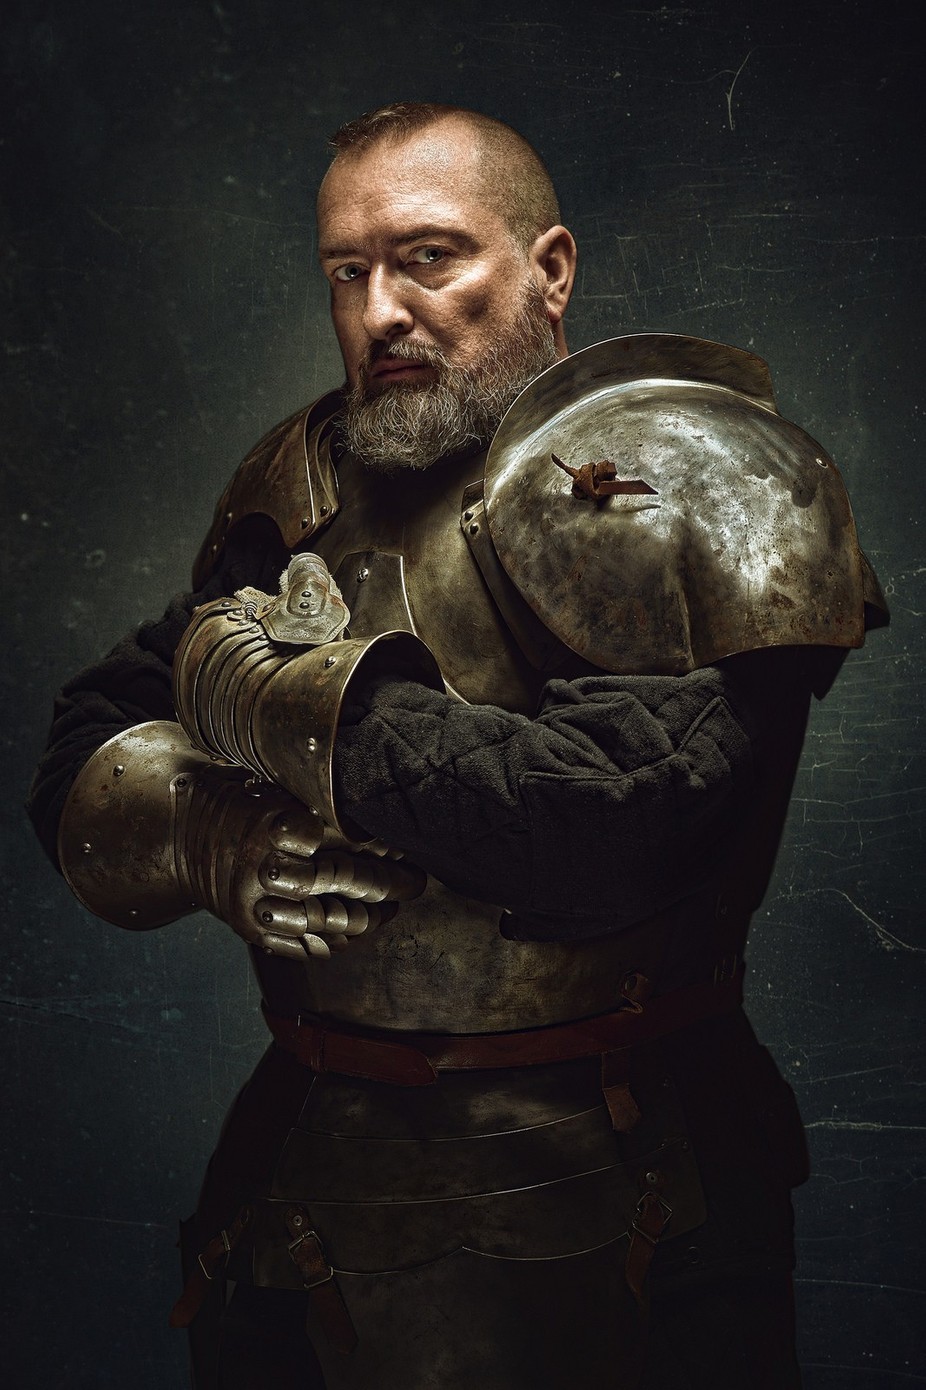 The Knight by Denis09 - Portraits with Props Photo Contest